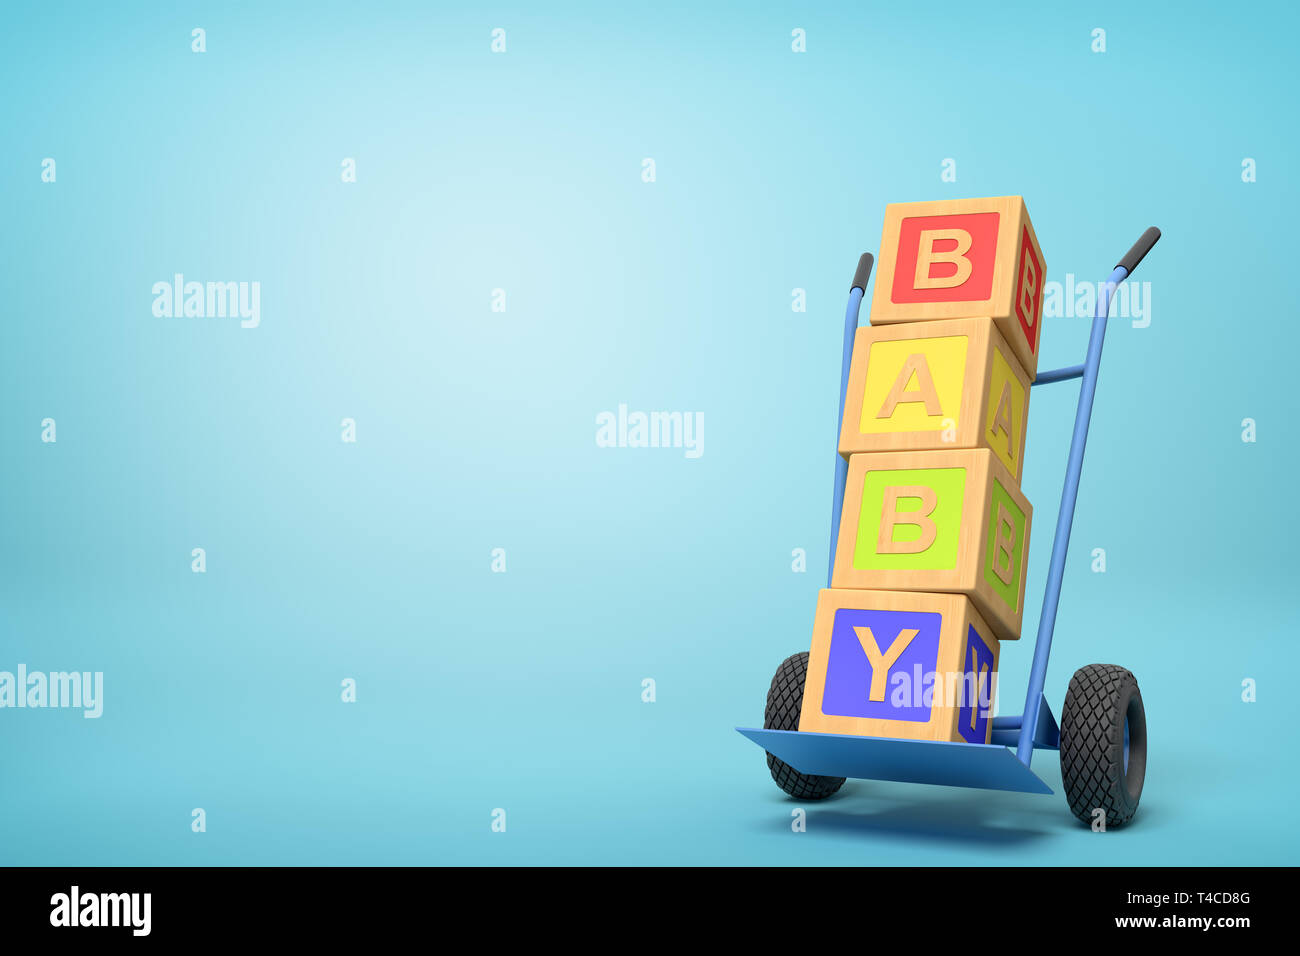 3d rendering of colorful alphabet toy blocks showing 'BABY' sign on a hand truck on blue background Stock Photo